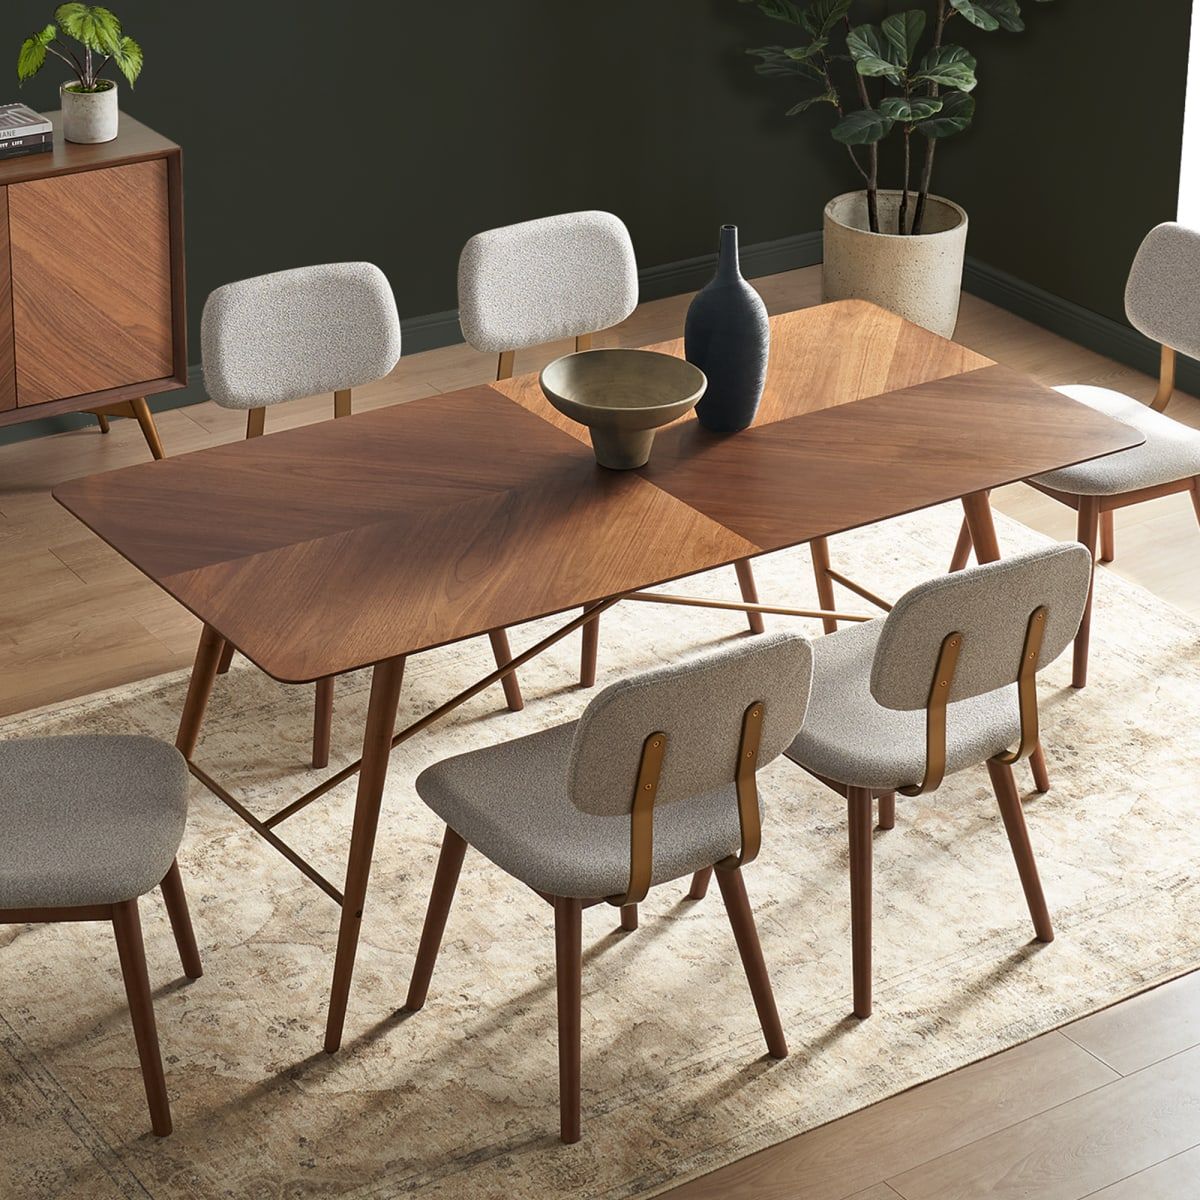 Comfortable Dining Table Chairs for Memorable Meals